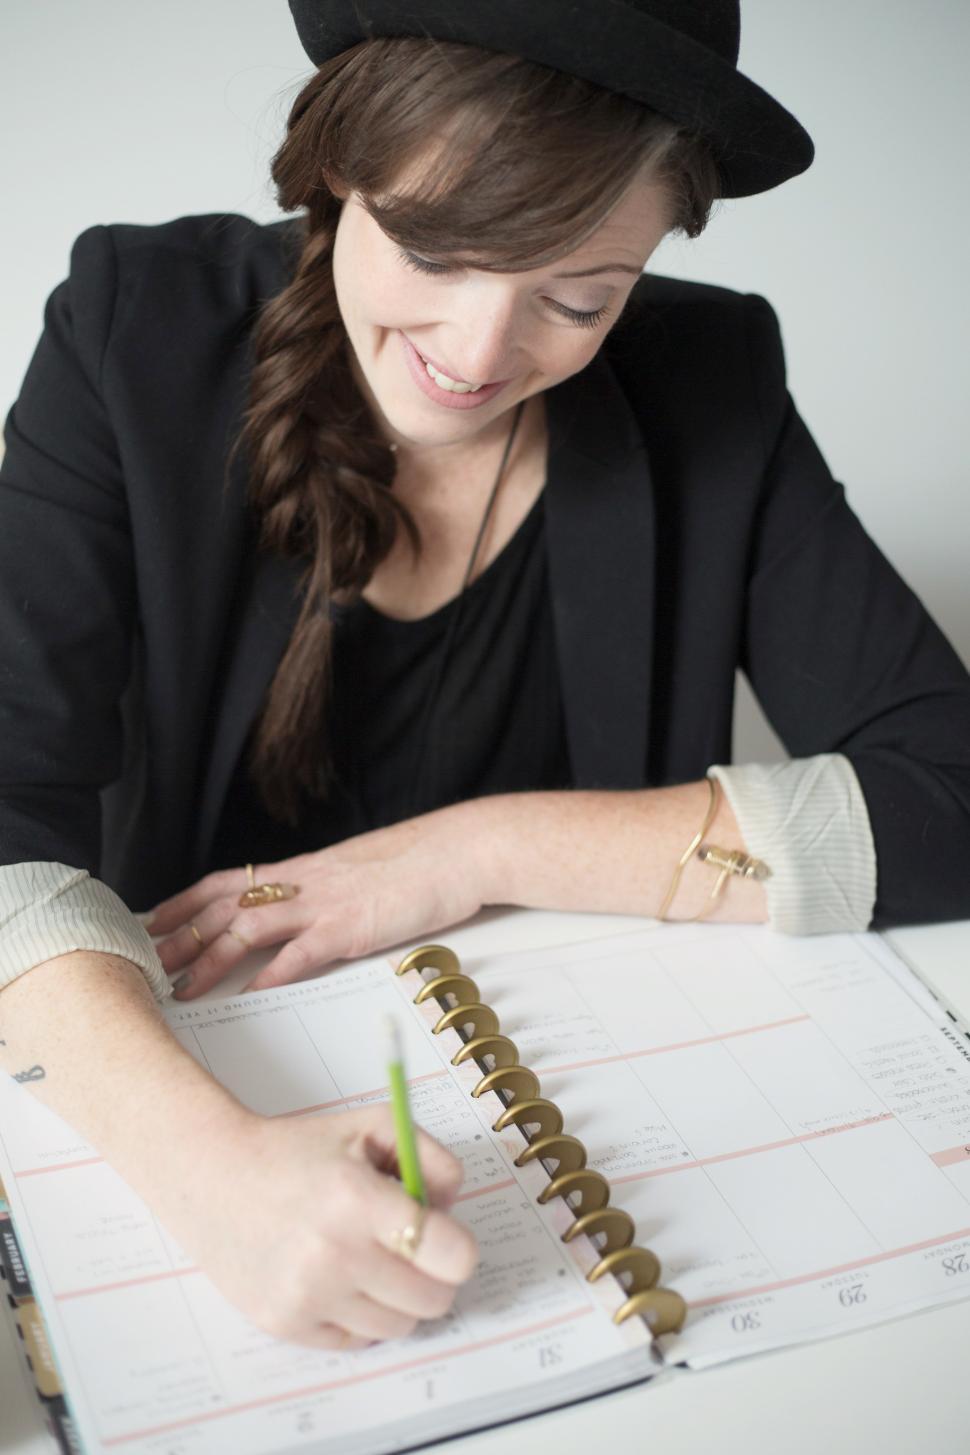 Free Image of A woman writing on a calendar 